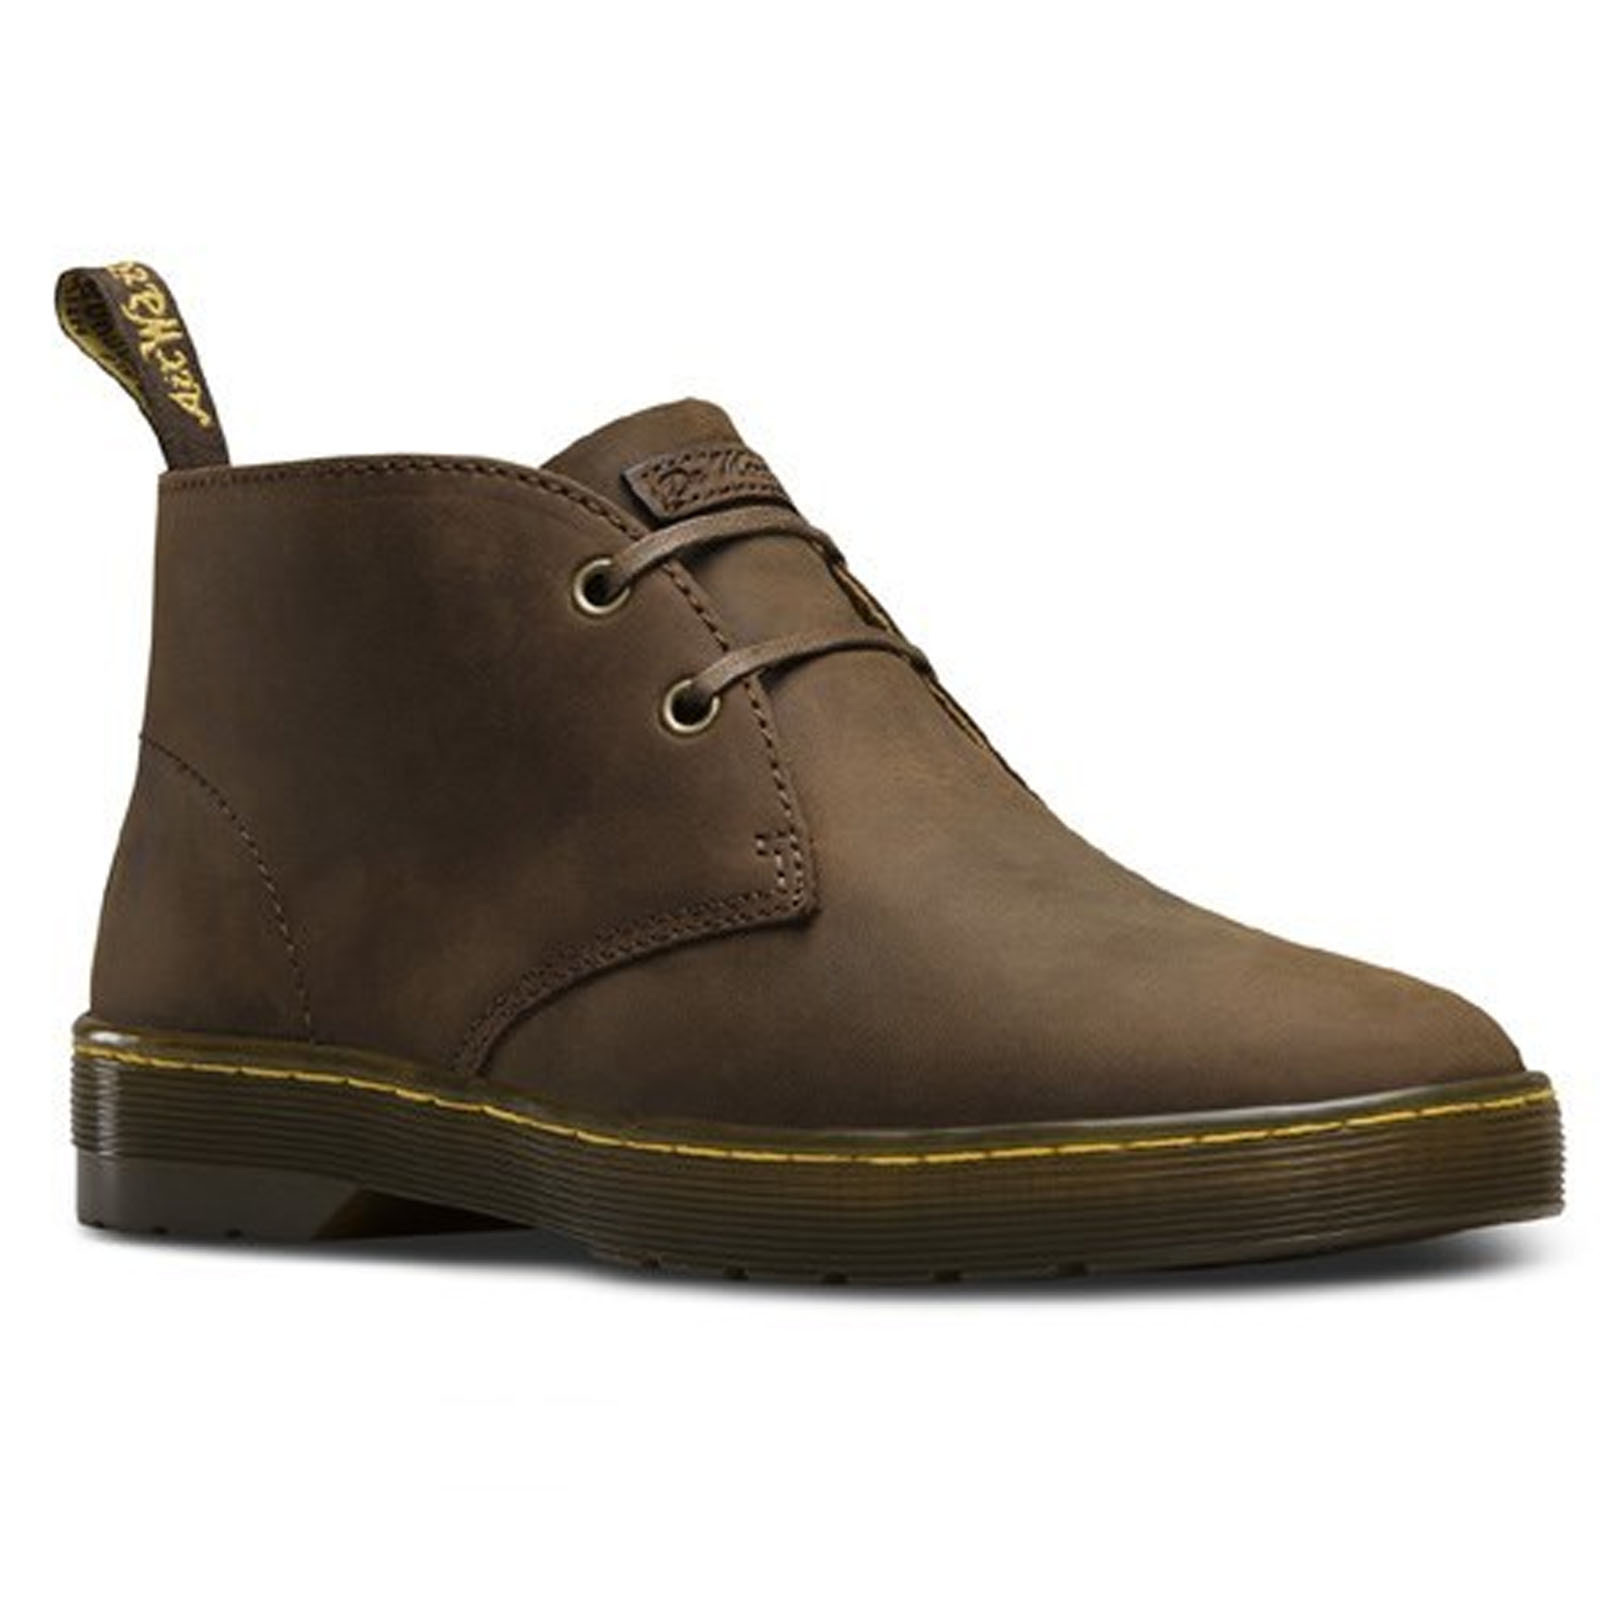 Dr.,Martens Cabrillo 2 Eye Shoes Lace Up Boots Leather Chukka - Gaucho